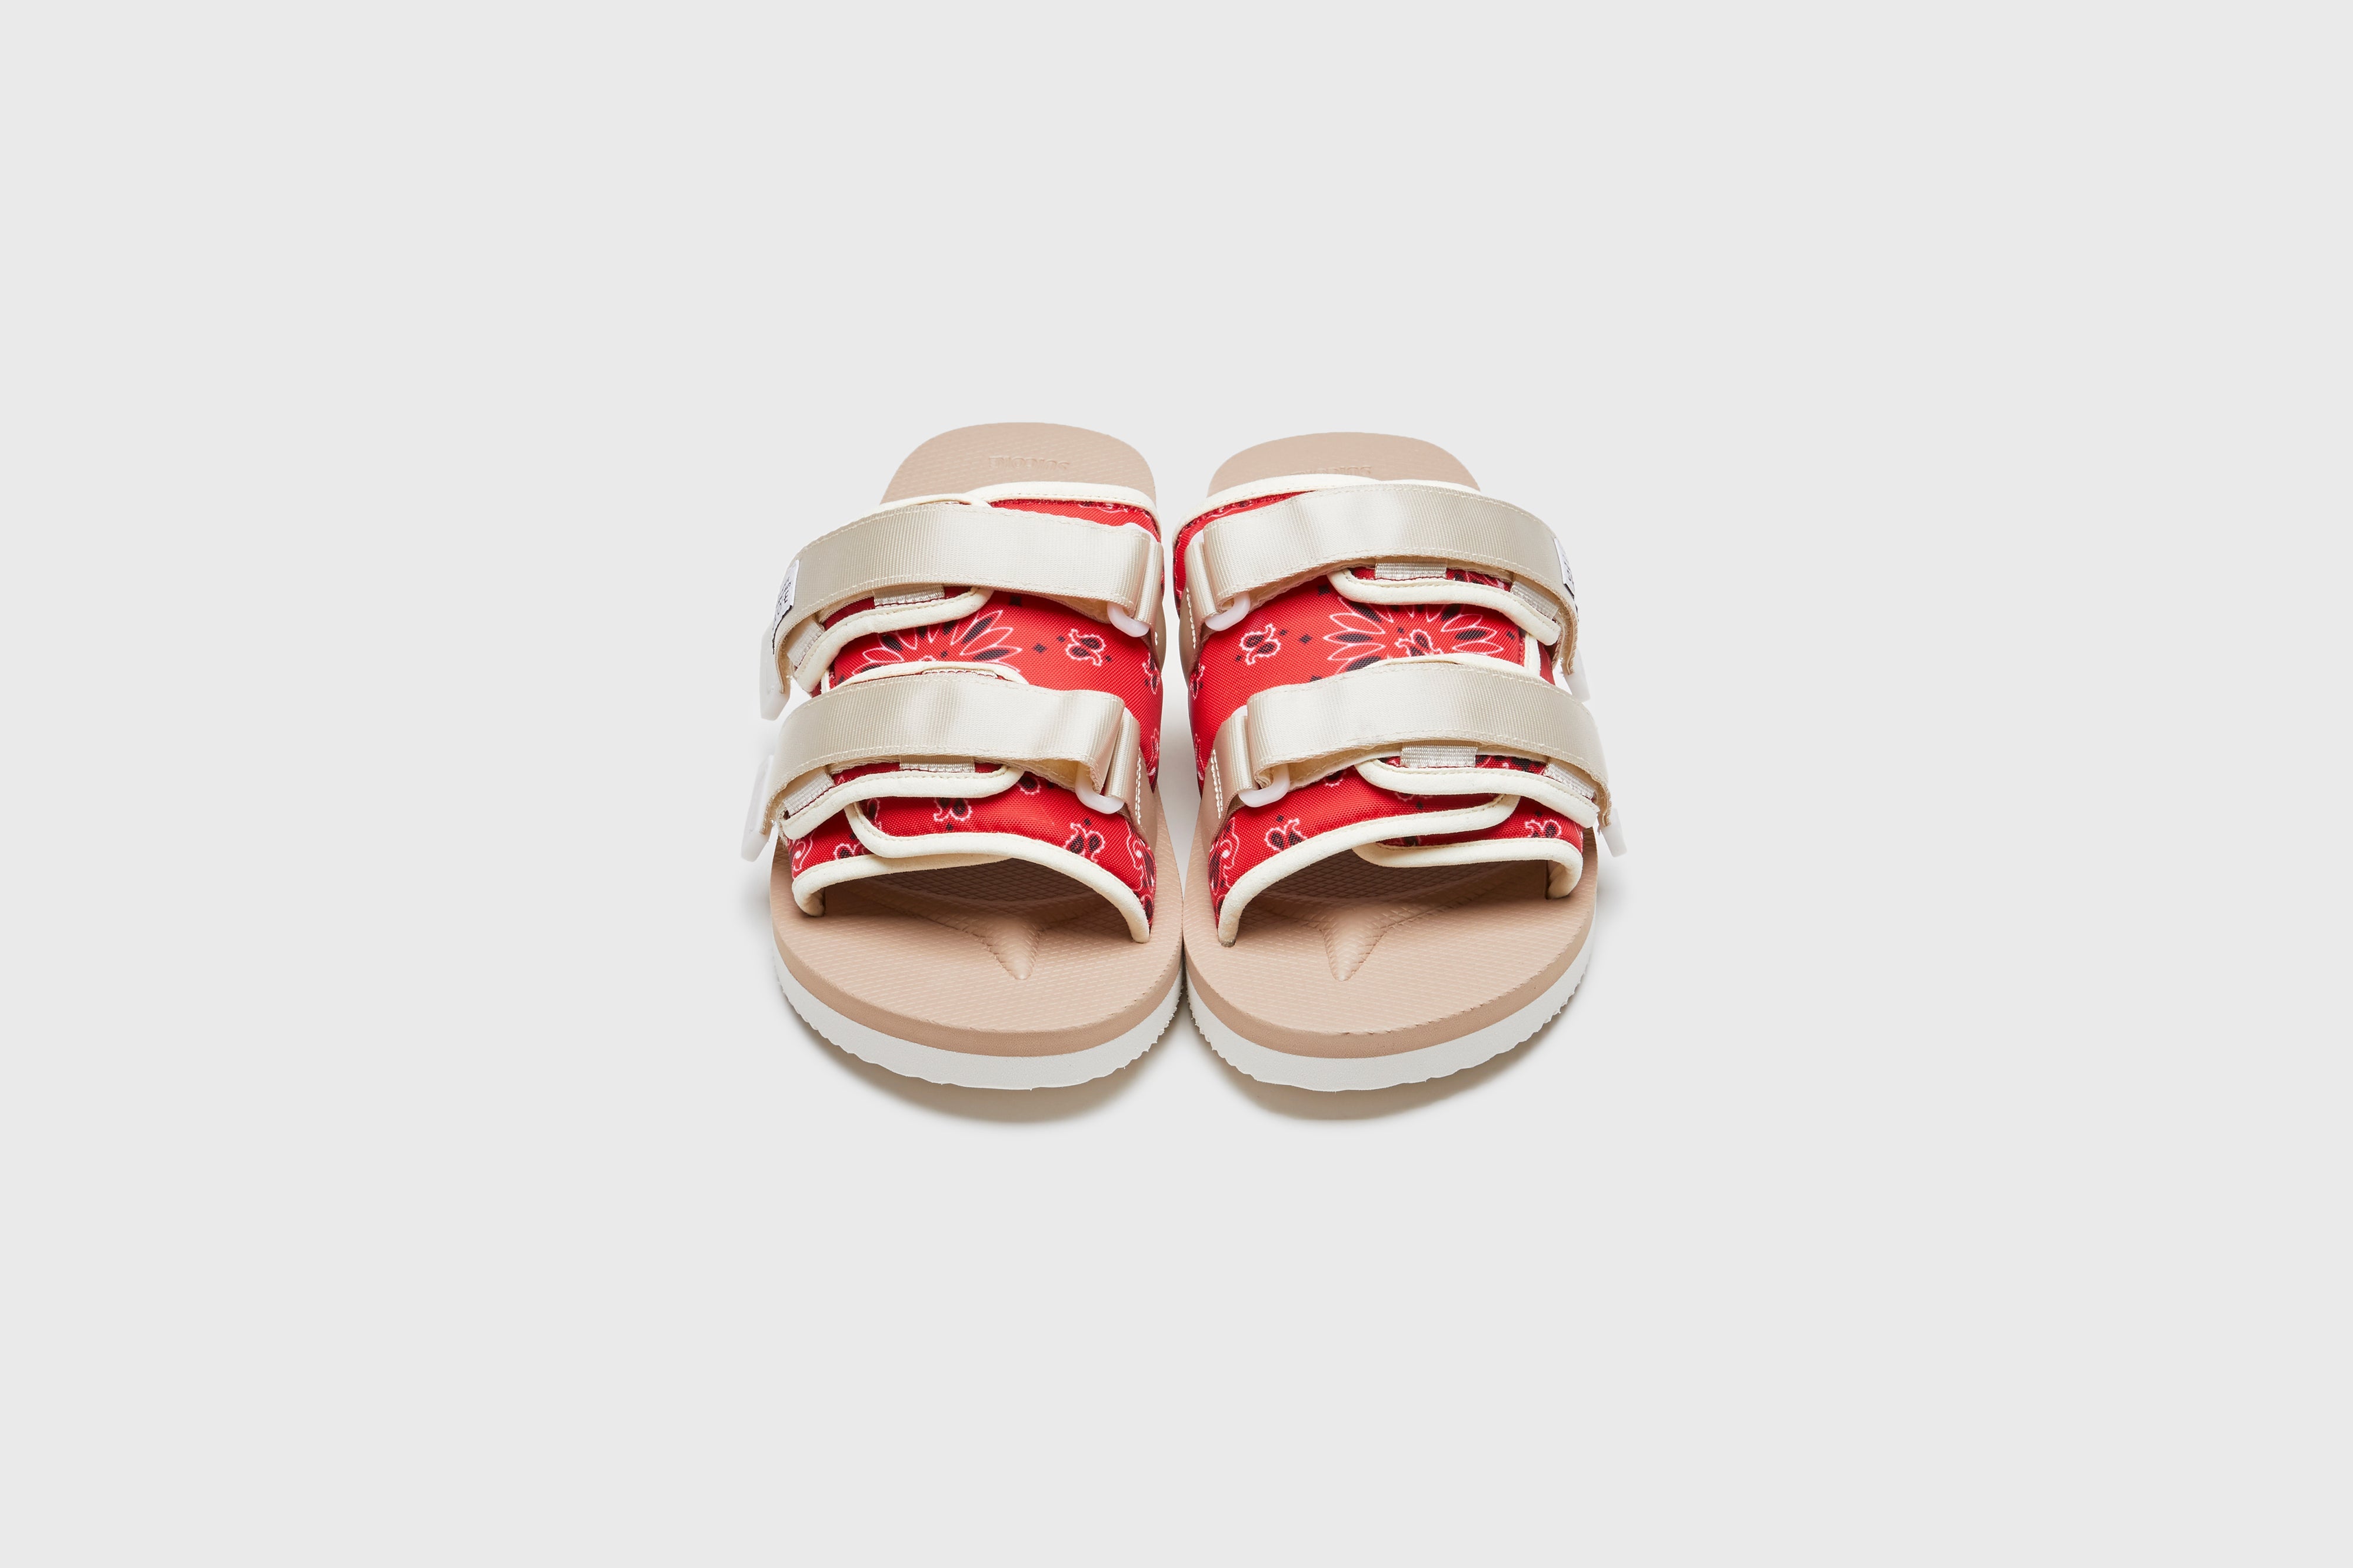 SUICOKE MOTO-Cab-PT05 slides with red &amp; beige nylon upper, red &amp; beige midsole and sole, strap and logo patch. From Spring/Summer 2023 collection on eightywingold Web Store, an official partner of SUICOKE. OG-056CAB-PT05 RED X BEIGE